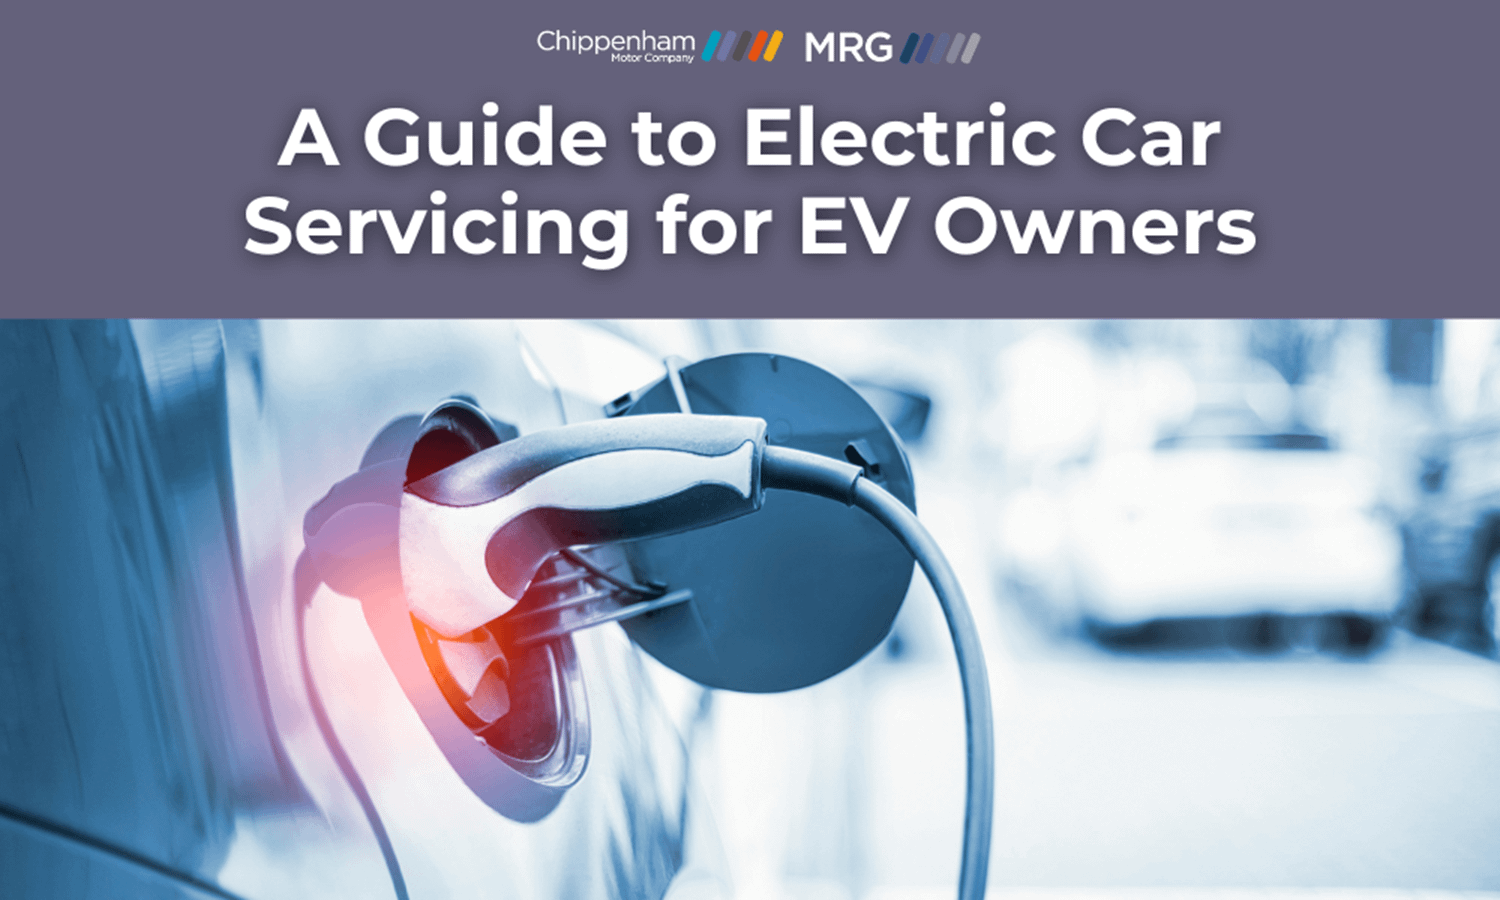 A Guide to Electric Car Servicing for EV Owners